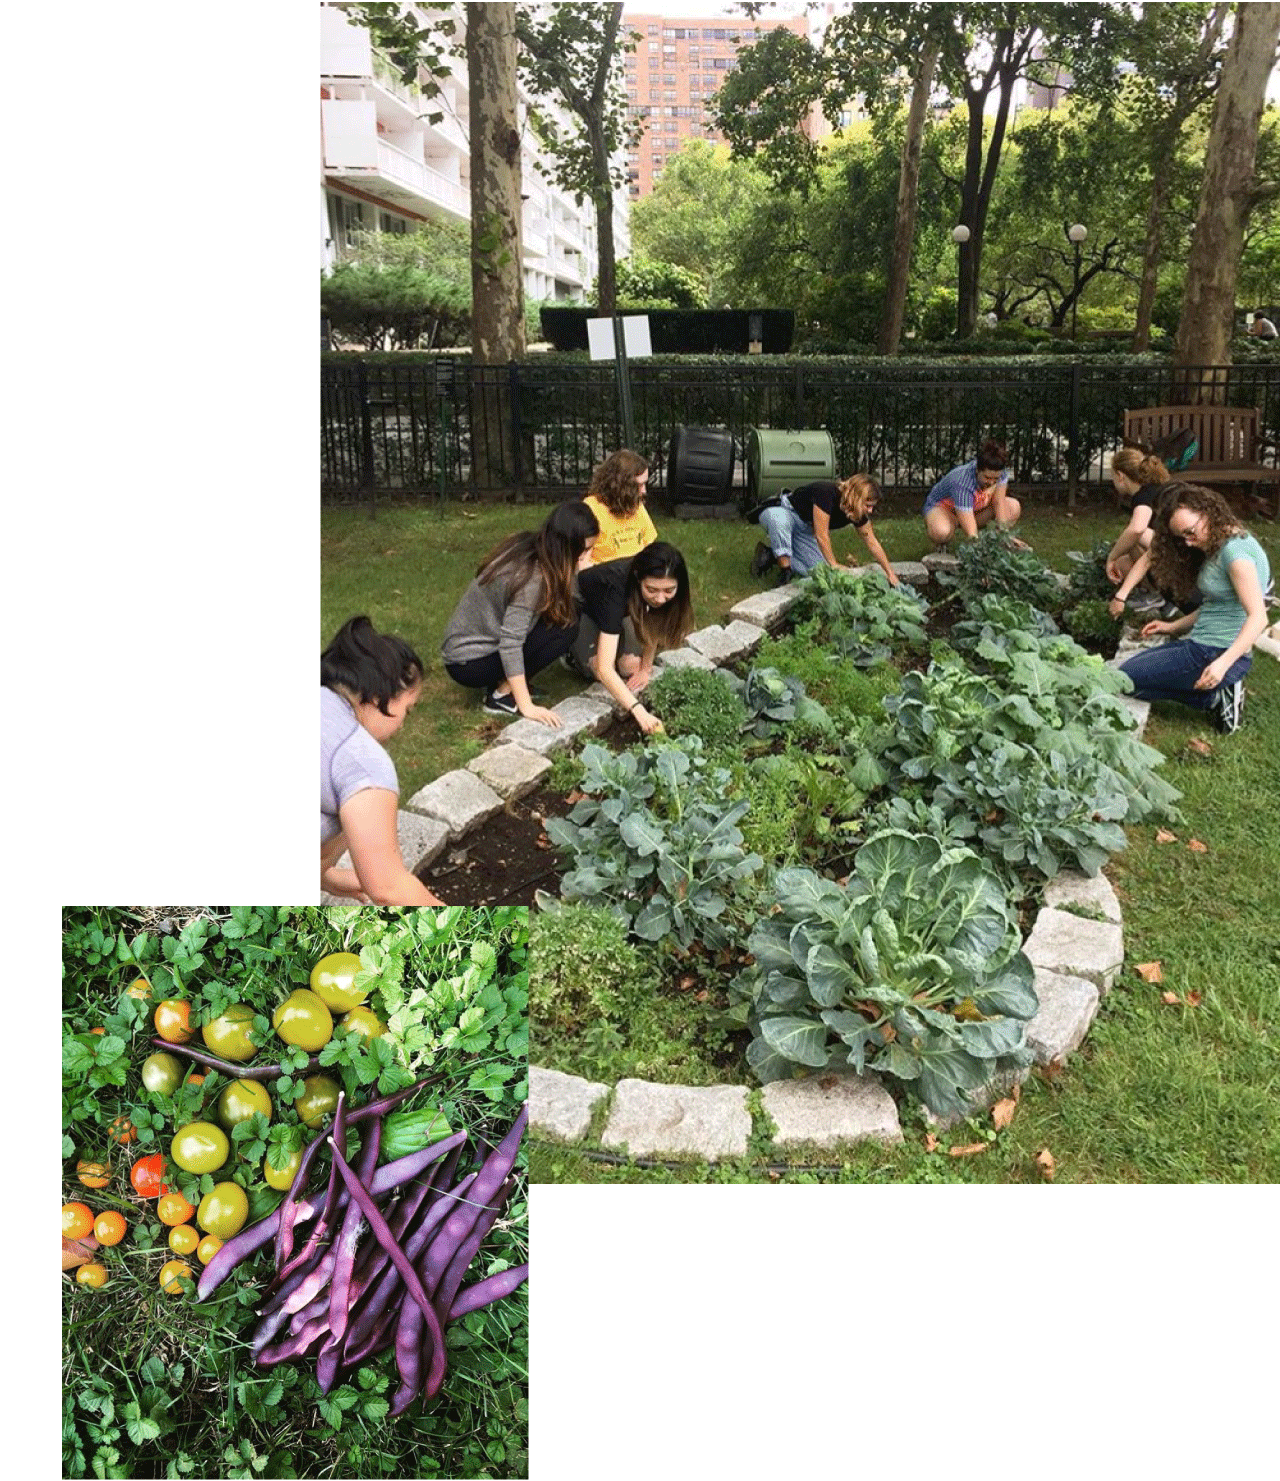 A collage: 1) Various vegetables, 2) Community Agriculture Club members working together in a small garden.